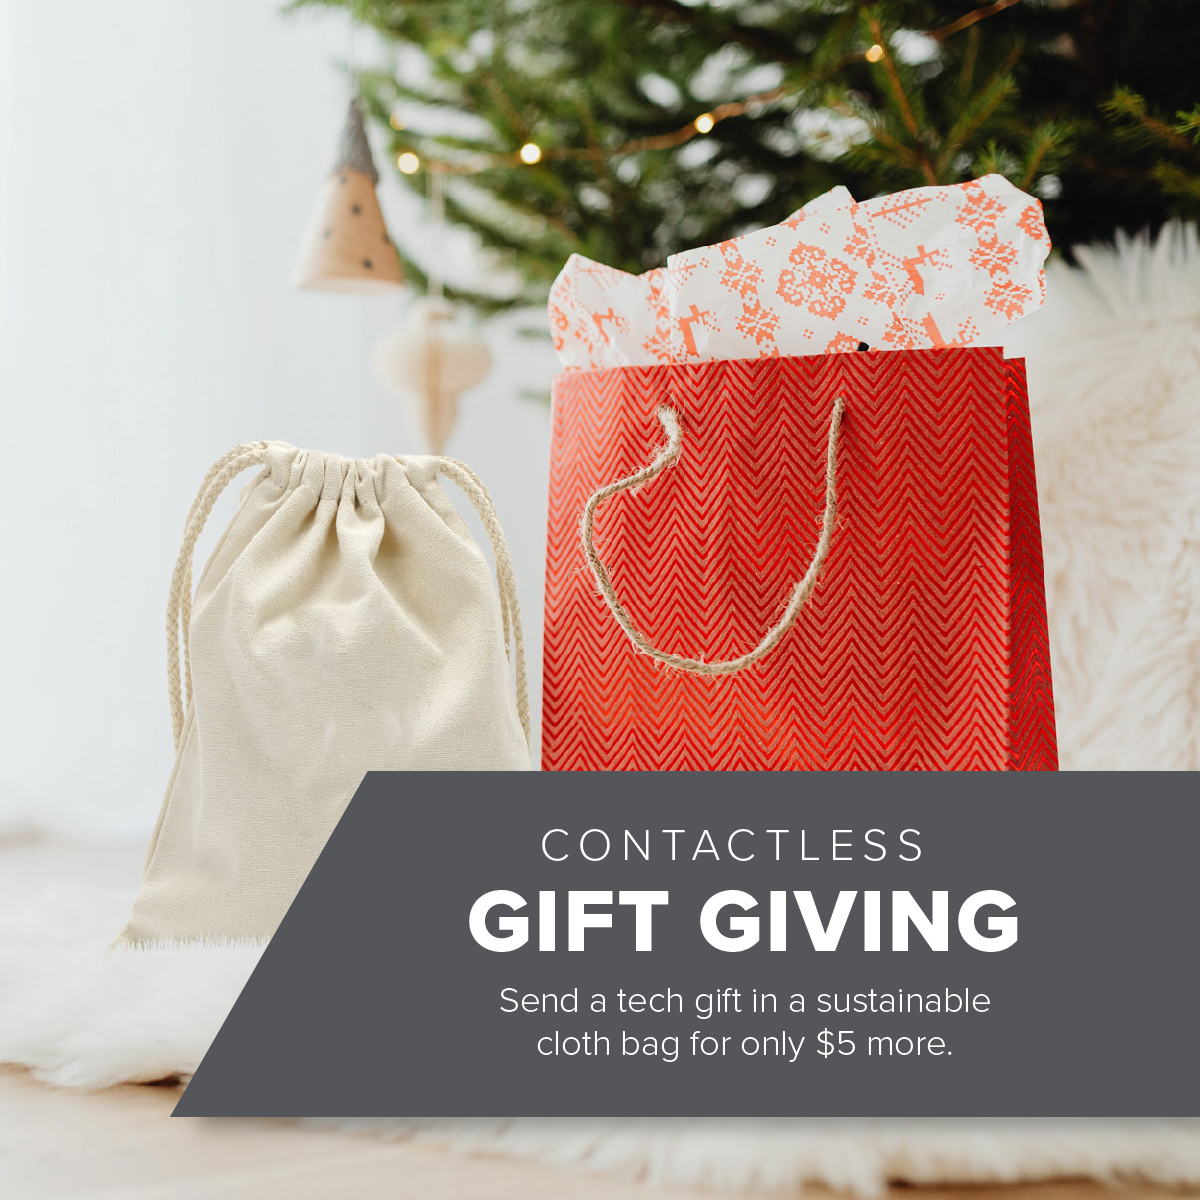 Contactless Gift Giving | Send a tech gift in a sustainable cloth bag for only five dollars more.